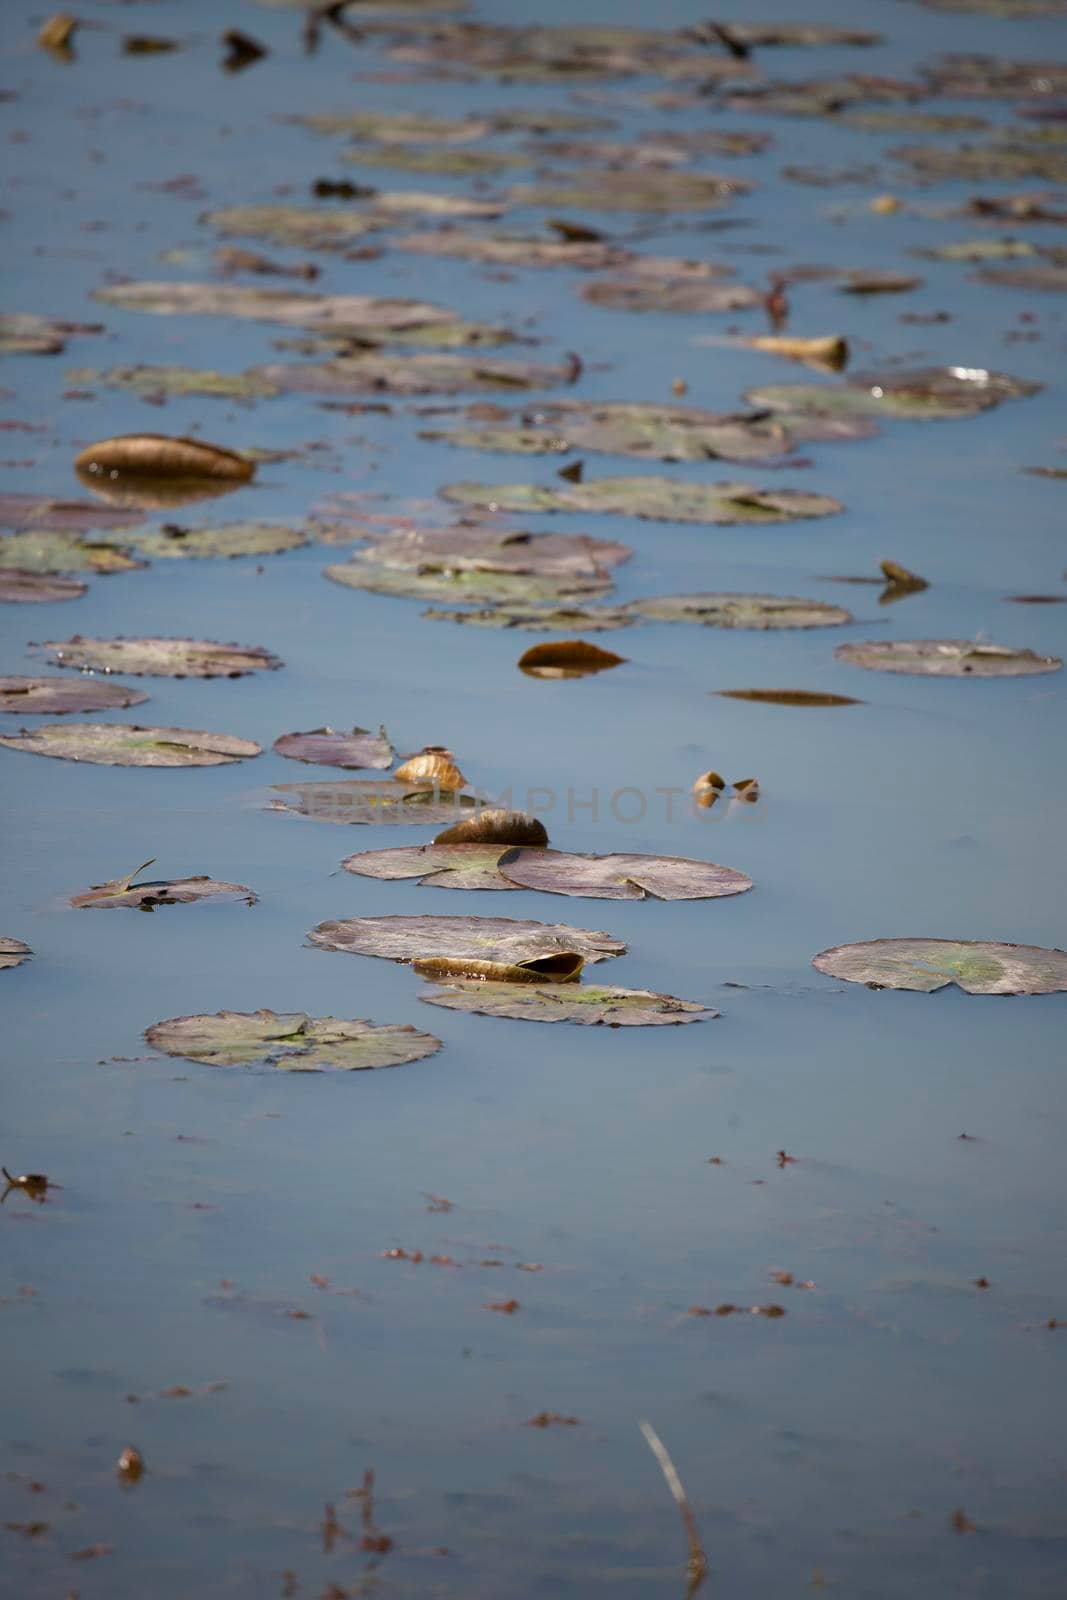 Lily pads scattered throughout the surface of a lake